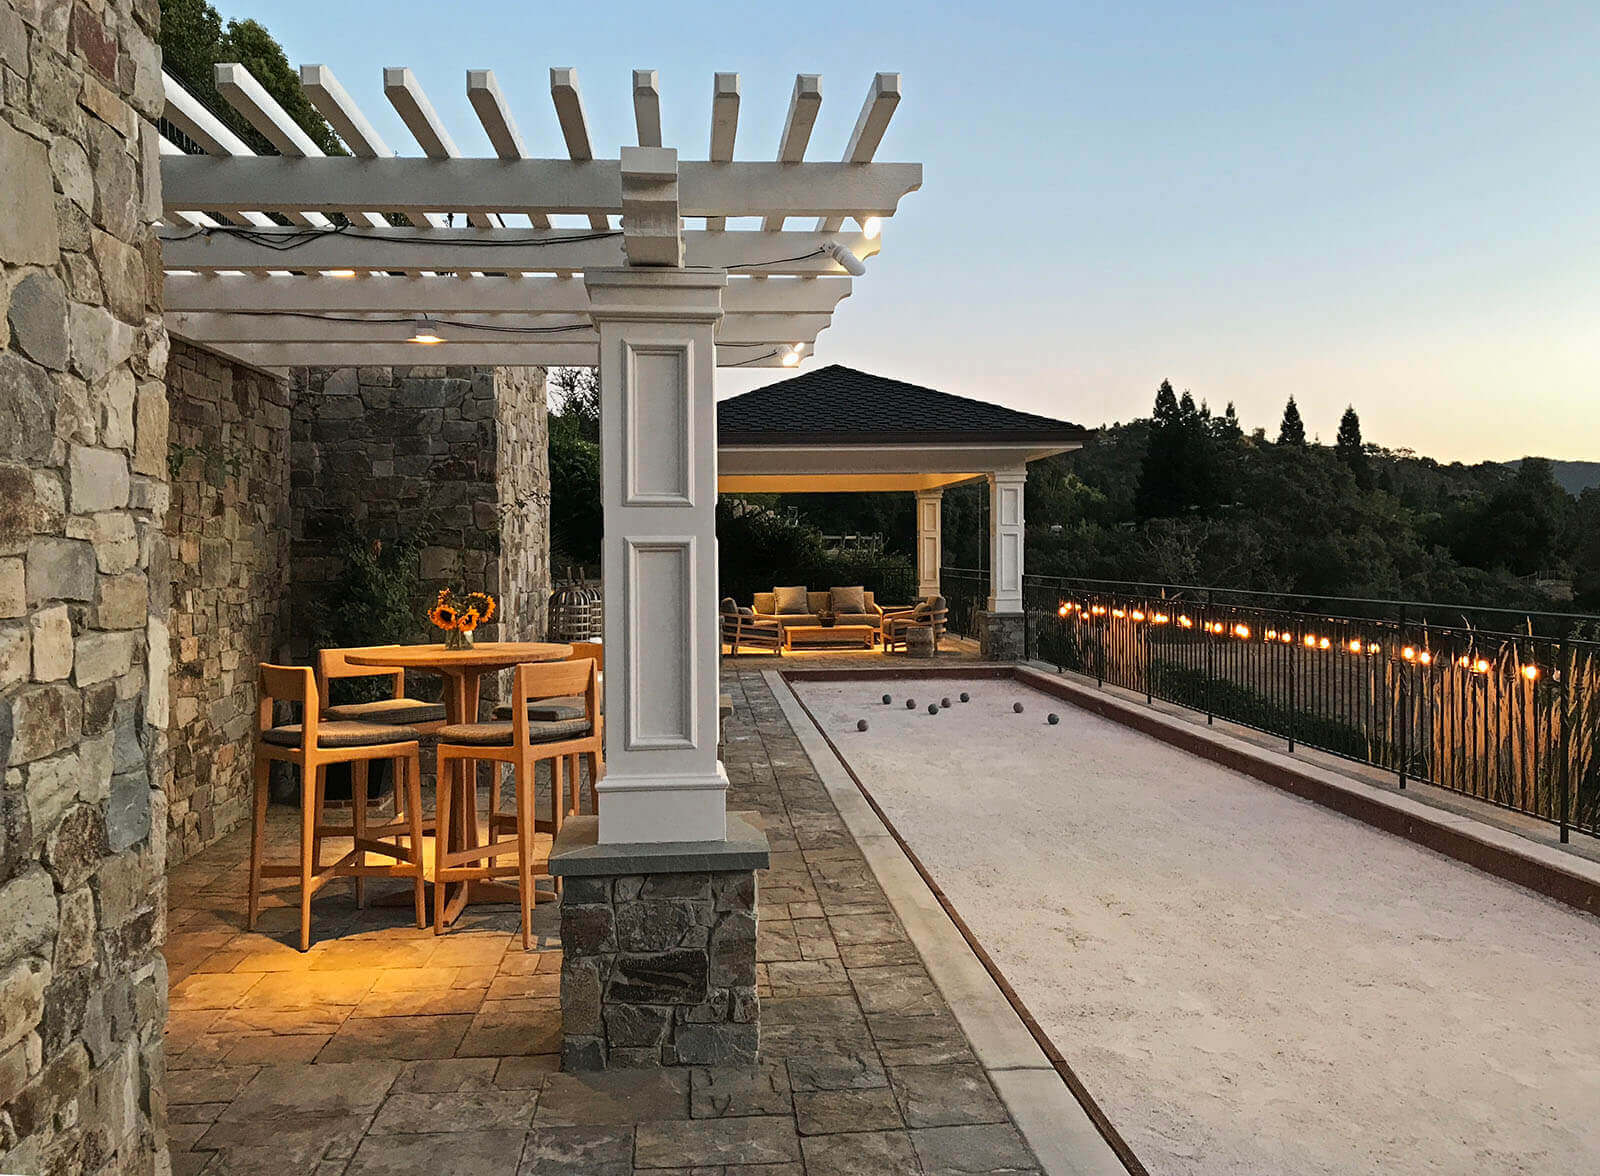 Ambient lighting in little pergola and covered veranda, with lights on the fences edge